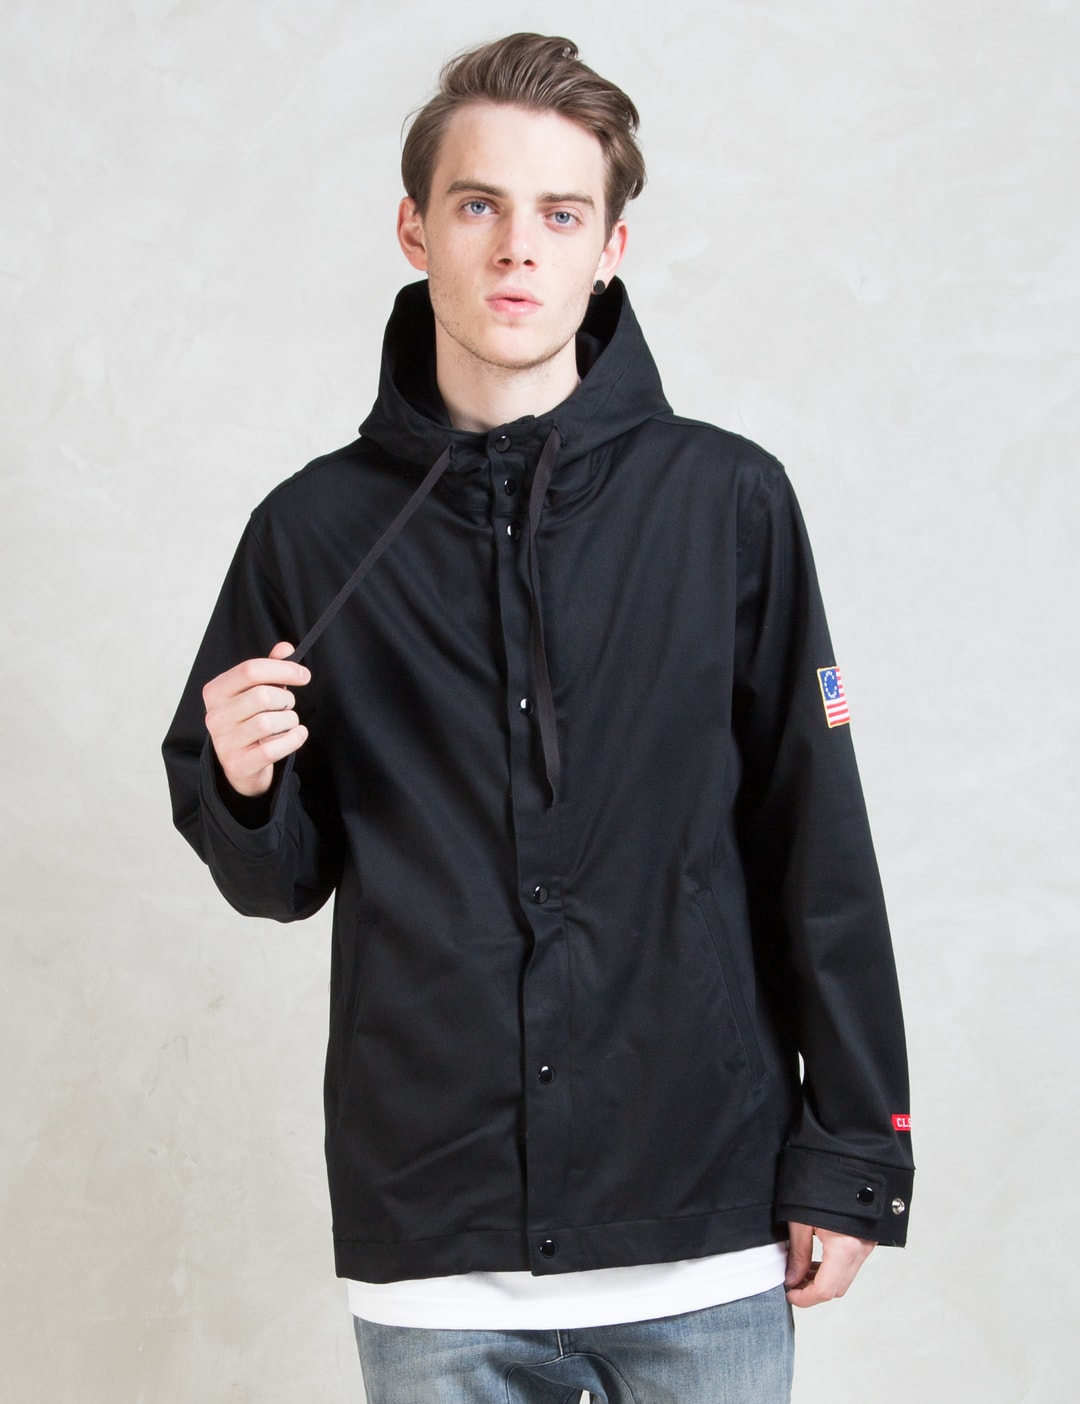 Clsc - Always Ready Hooded Coach Jacket | HBX - Globally Curated ...